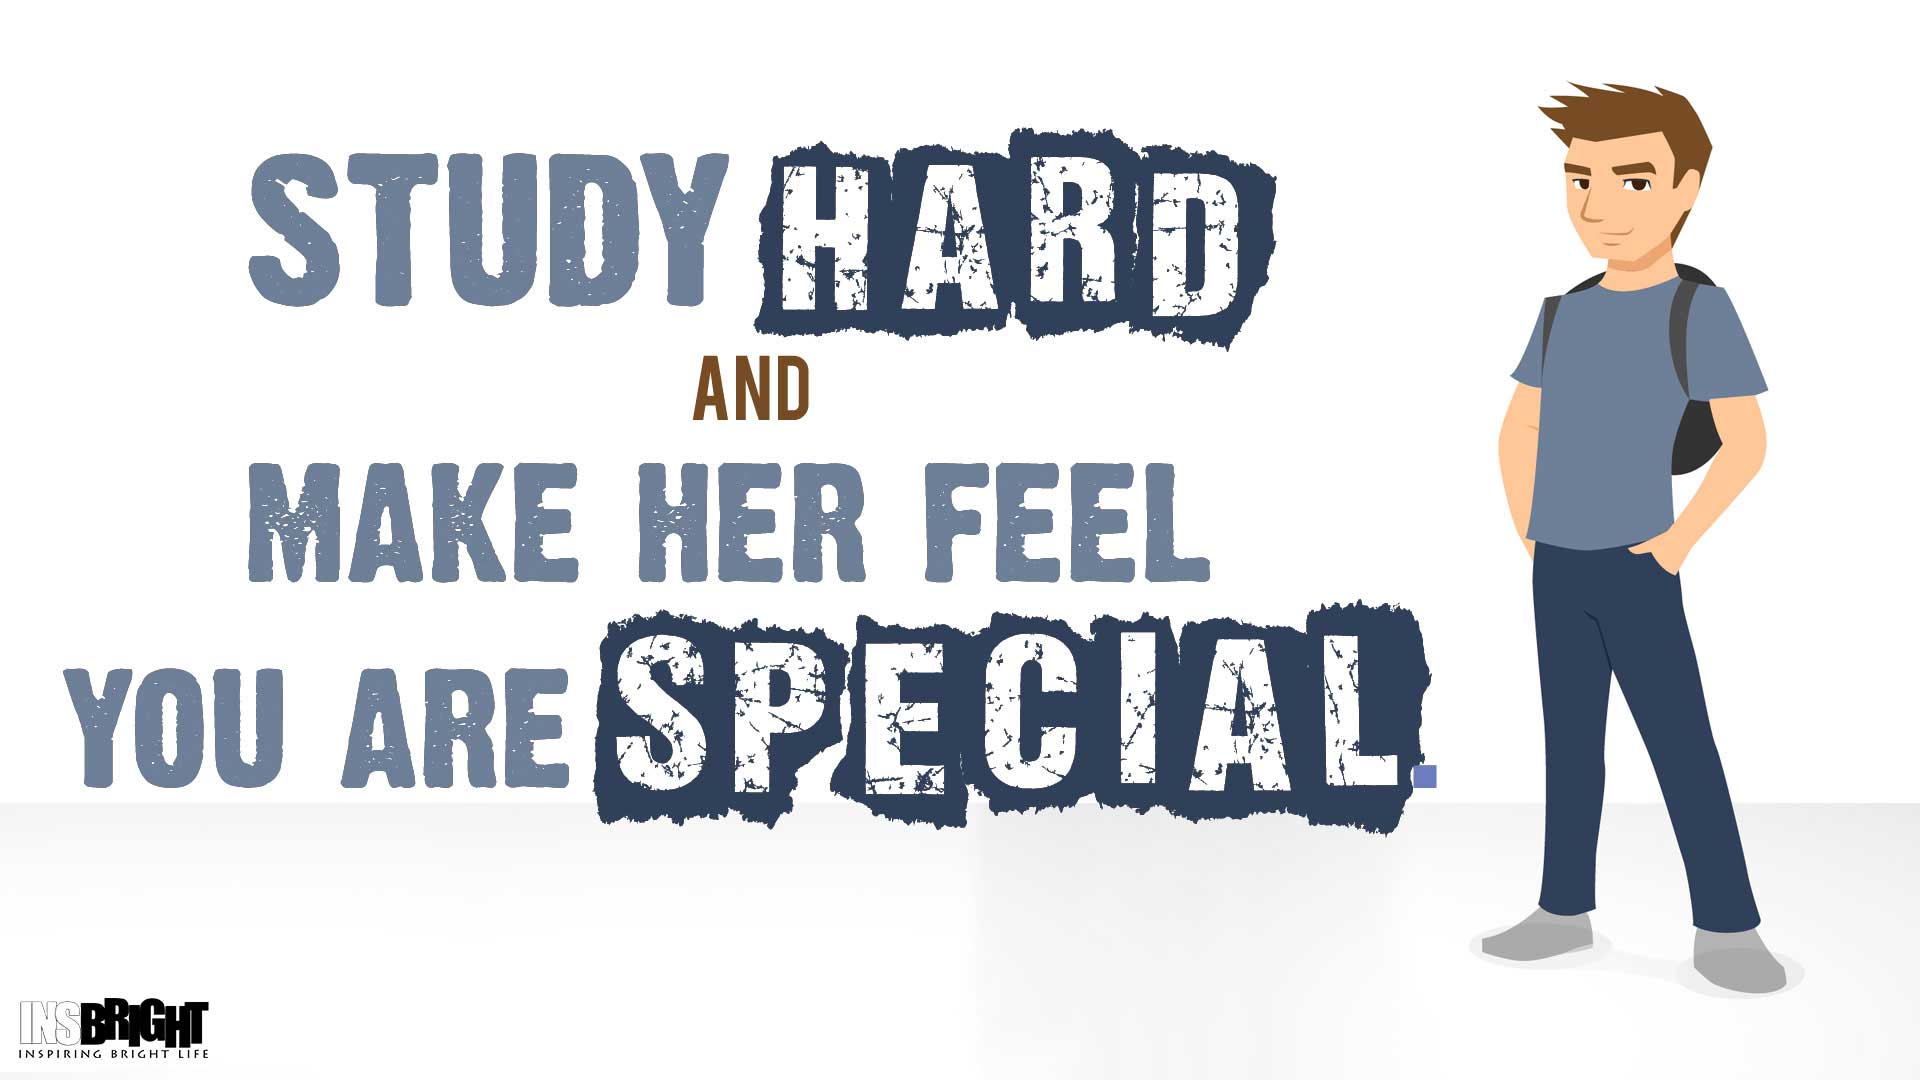 Study Wallpaper HD -Keep Calm And Study Hard | Insbright